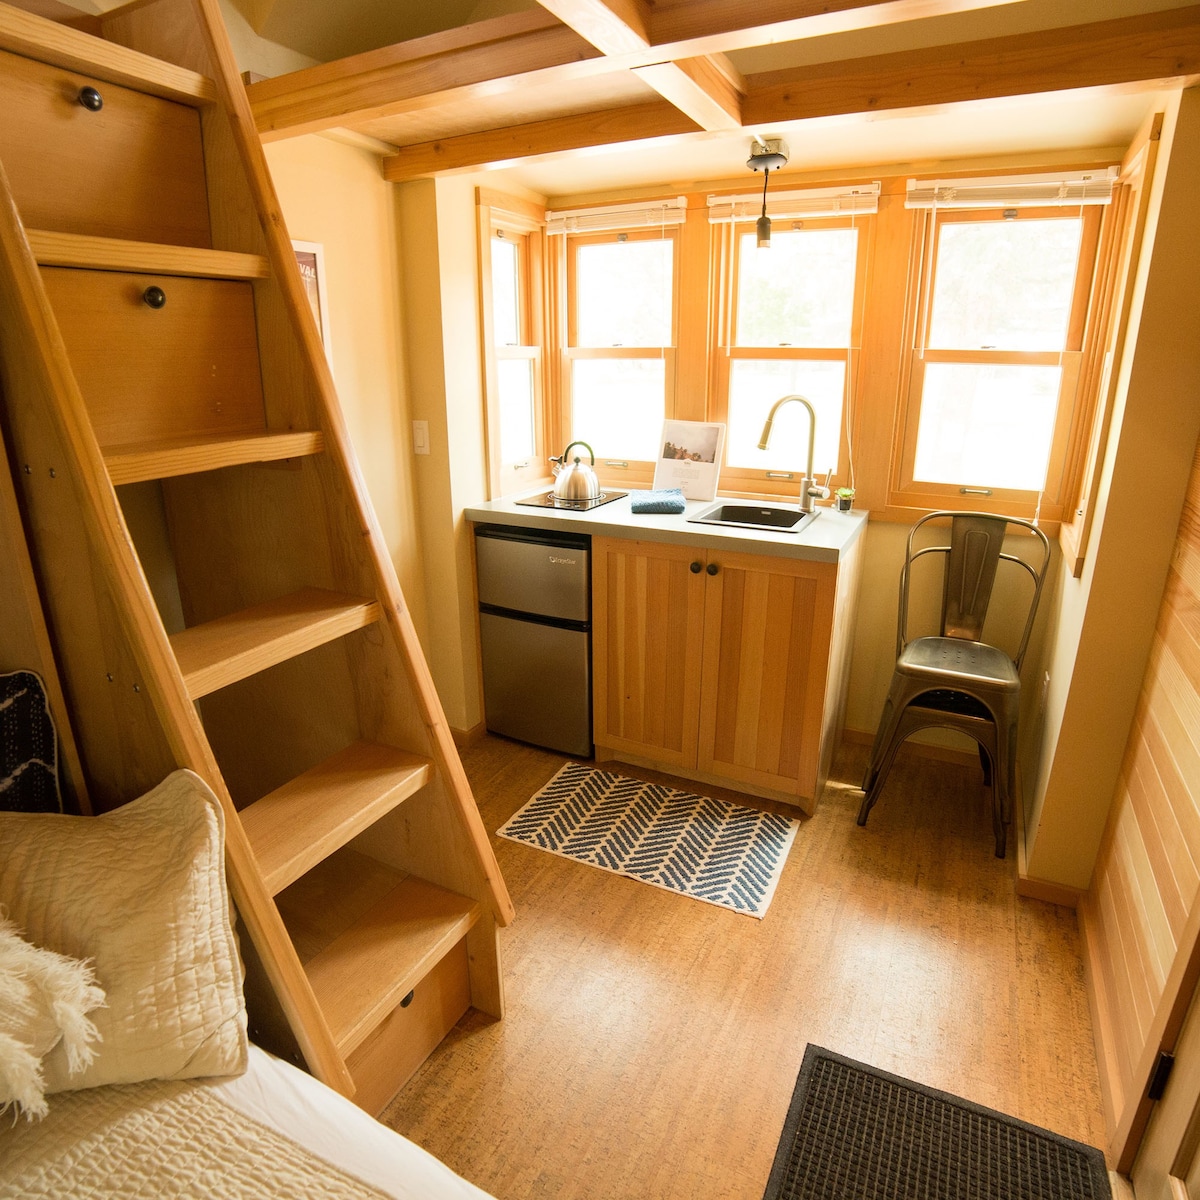 Couple's Getaway at a Tiny House Resort